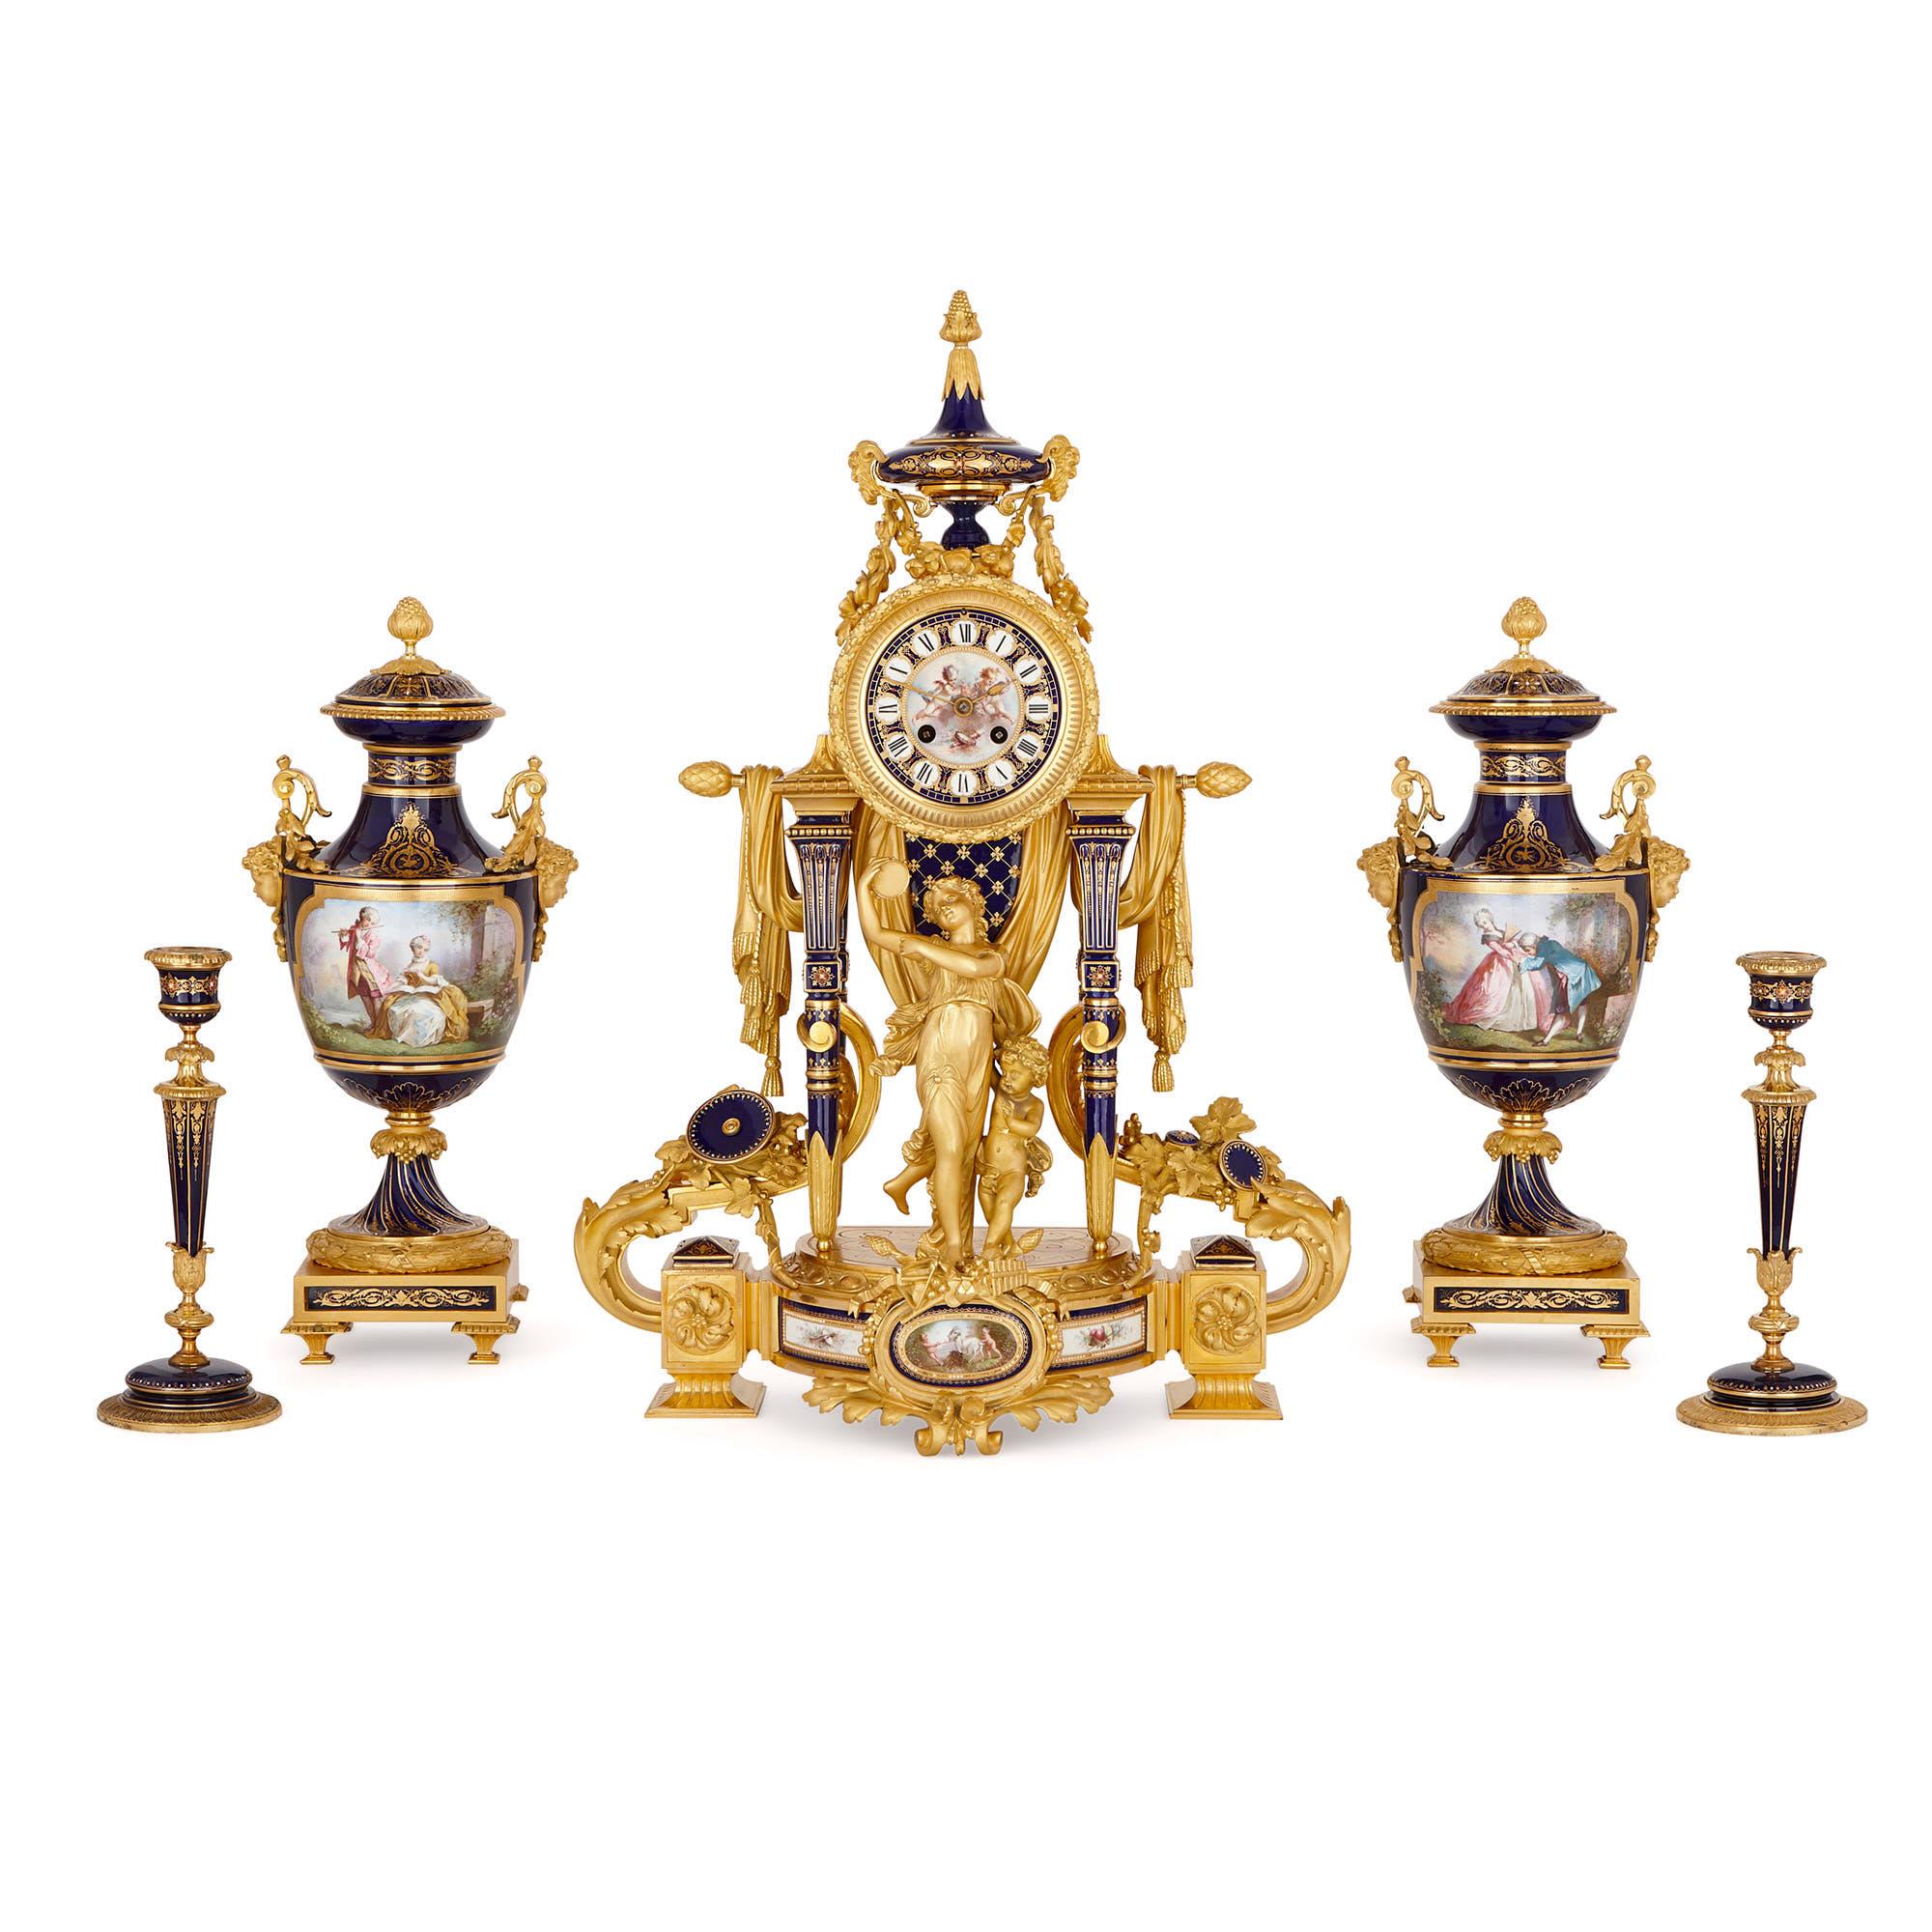 This magnificent five-piece clock set is designed in the style of 18th century porcelain produced by the famous Sèvres Manufactory in France. The set is comprised of a mantel clock, a pair of flanking vases—which double-up as candelabra—and two